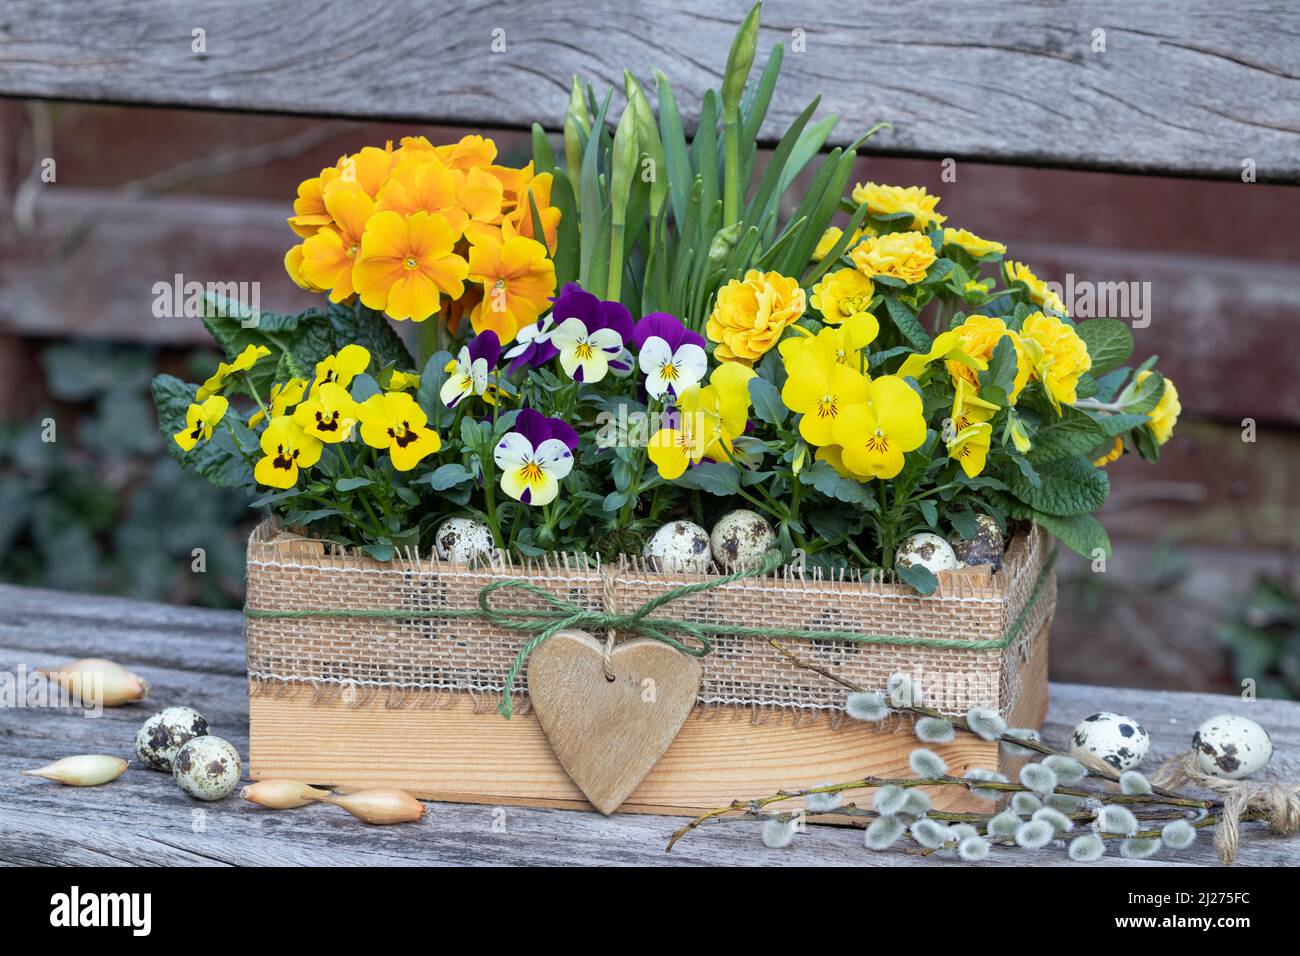 yellow viola flowers and primroses in wooden box as spring floral decoration Stock Photo